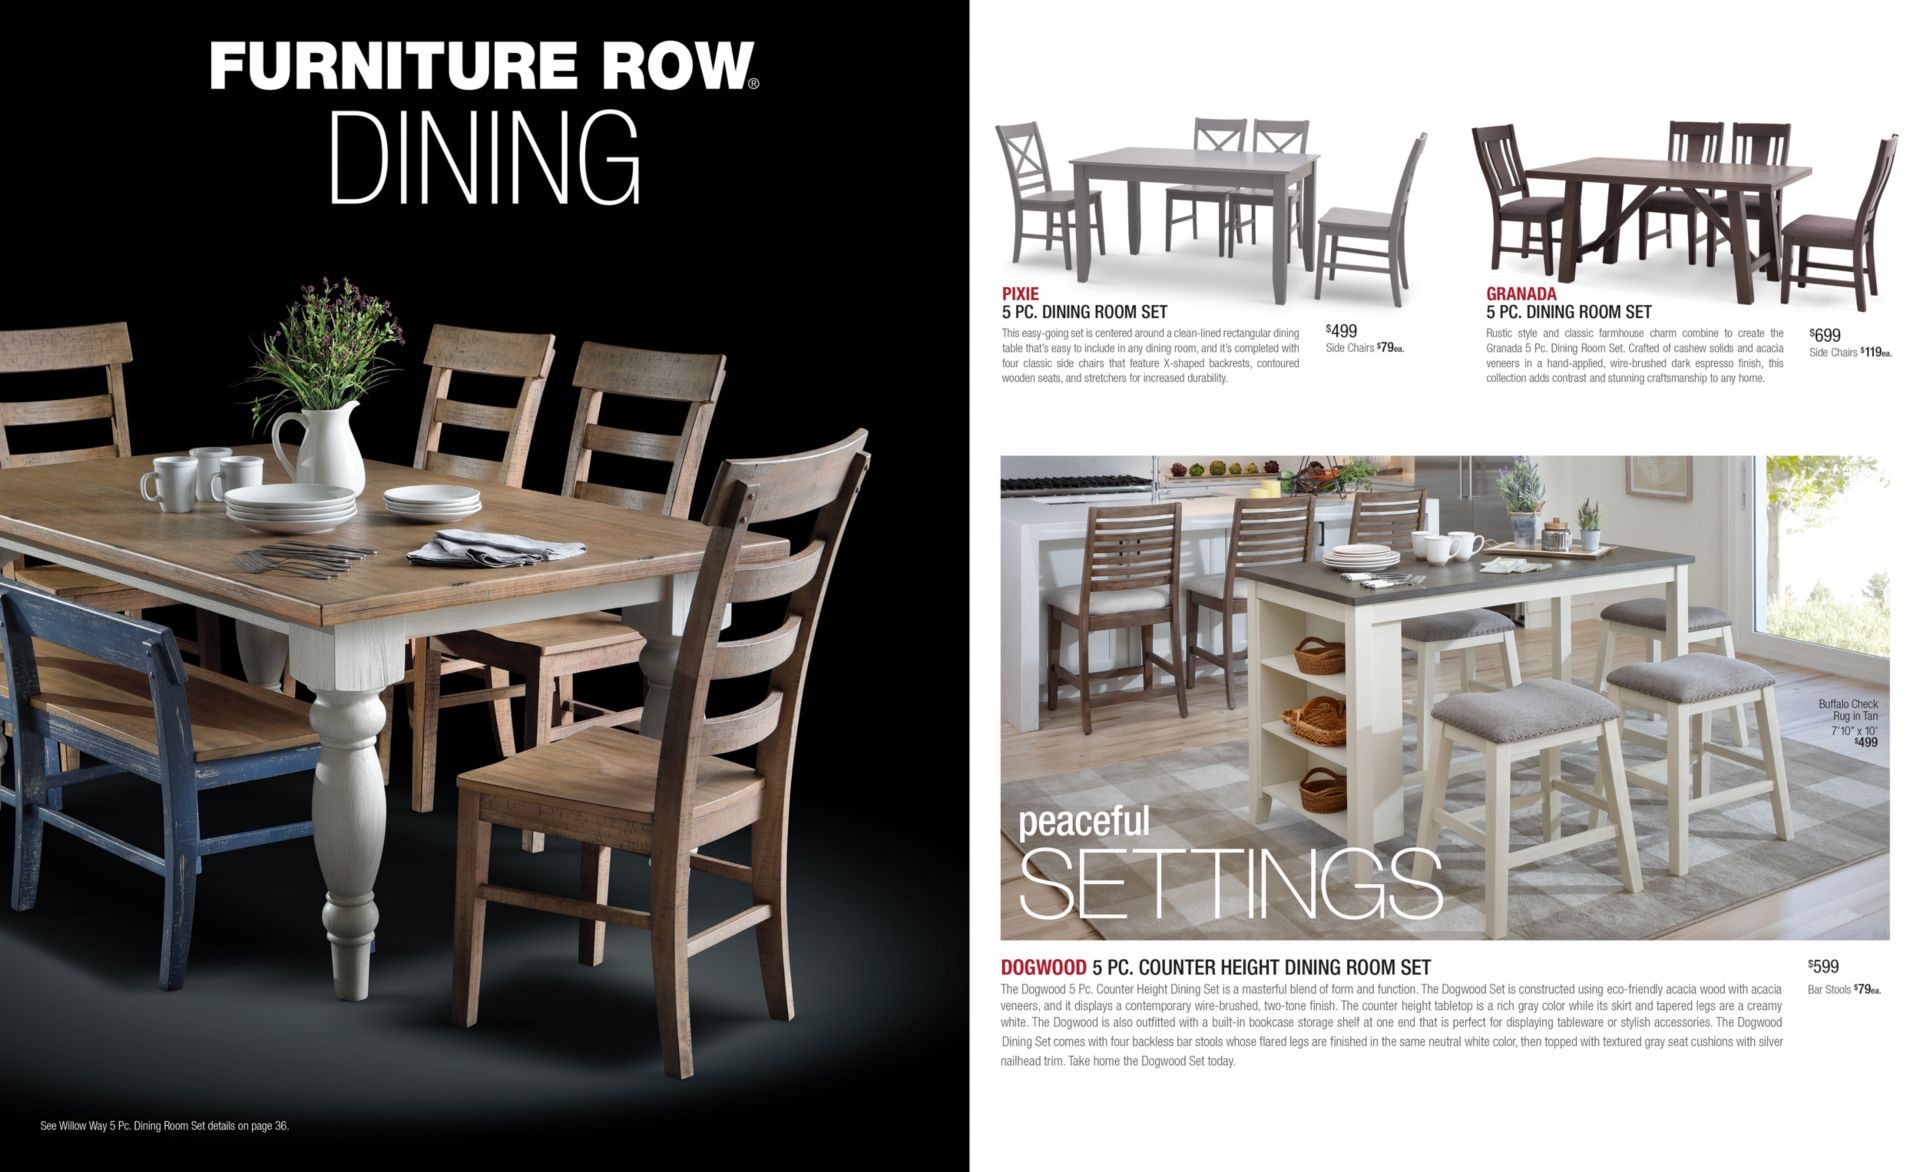 Furniture Row Dining. Catalog Preview. Text: Peaceful Settings. PIXIE 5 PC. DINING ROOM SET This easy-going set is centered around a clean-lined rectangular dining table that’s easy to include in any dining room, and it’s completed with four classic side chairs that feature X-shaped backrests, contoured wooden seats, and stretchers for increased durability. GRANADA 5 PC. DINING ROOM SET Rustic style and classic farmhouse charm combine to create the Granada 5 Pc. Dining Room Set. Crafted of cashew solids and acacia veneers in a hand-applied, wire-brushed dark espresso finish, this collection adds contrast and stunning craftsmanship to any home. DOGWOOD 5 PC. COUNTER HEIGHT DINING ROOM SET The Dogwood 5 Pc. Counter Height Dining Set is a masterful blend of form and function. The Dogwood Set is constructed using eco-friendly acacia wood with acacia veneers, and it displays a contemporary wire-brushed, two-tone finish. The counter height tabletop is a rich gray color while its skirt and tapered legs are a creamy white. The Dogwood is also outfitted with a built-in bookcase storage shelf at one end that is perfect for displaying tableware or stylish accessories. The DogwoodDining Set comes with four backless bar stools whose flared legs are finished in the same neutral white color, then topped with textured gray seat cushions with silver nailhead trim. Take home the Dogwood Set today.